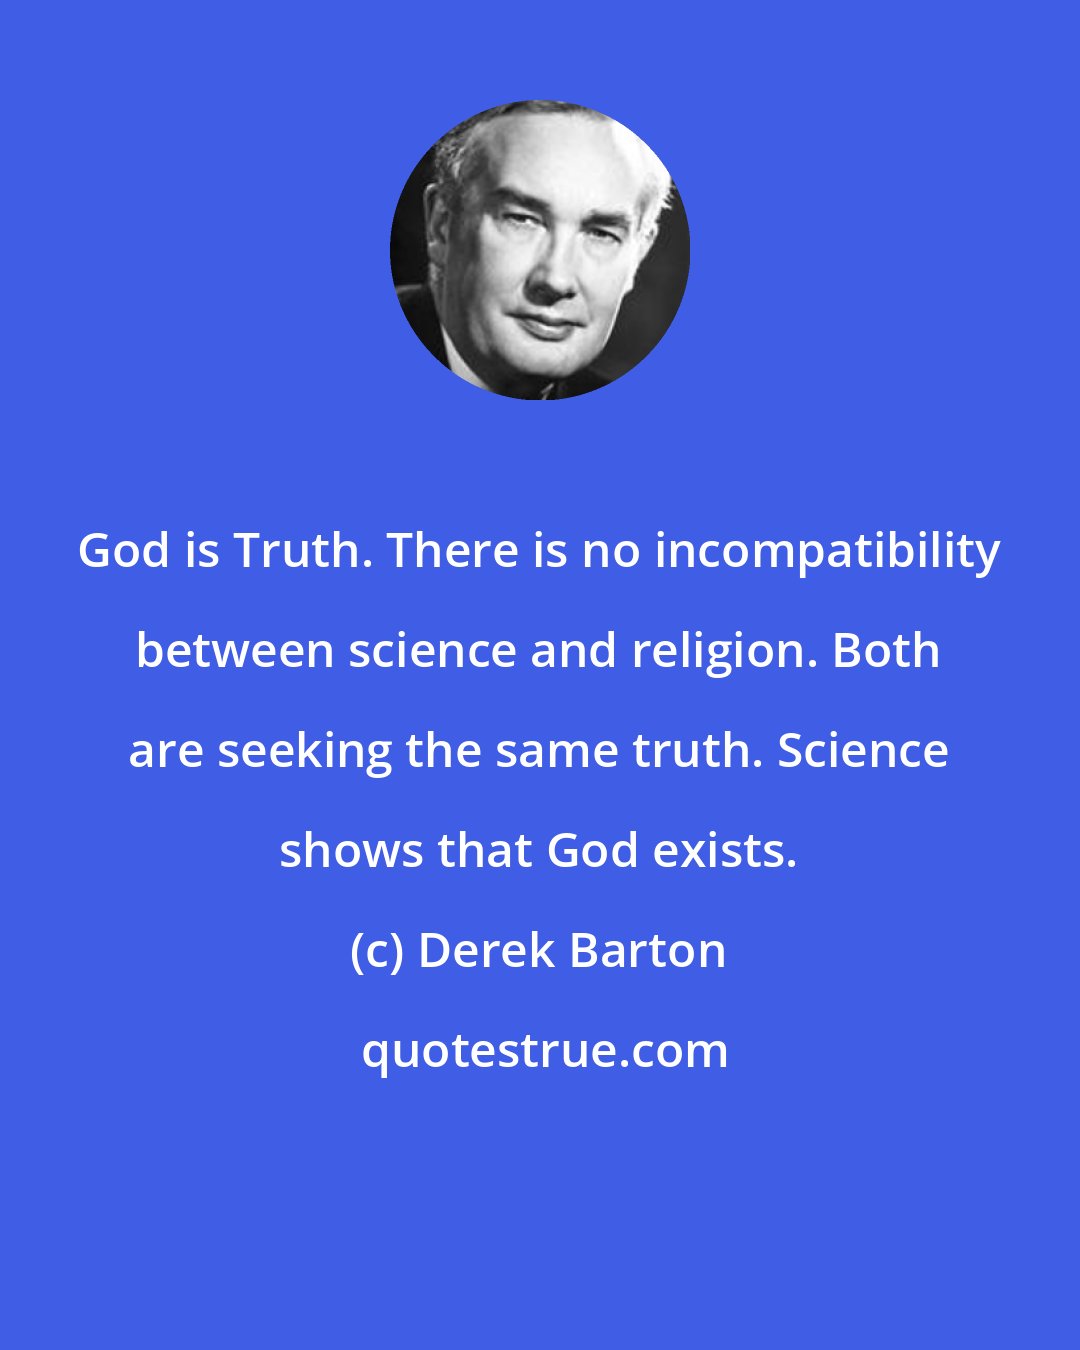 Derek Barton: God is Truth. There is no incompatibility between science and religion. Both are seeking the same truth. Science shows that God exists.